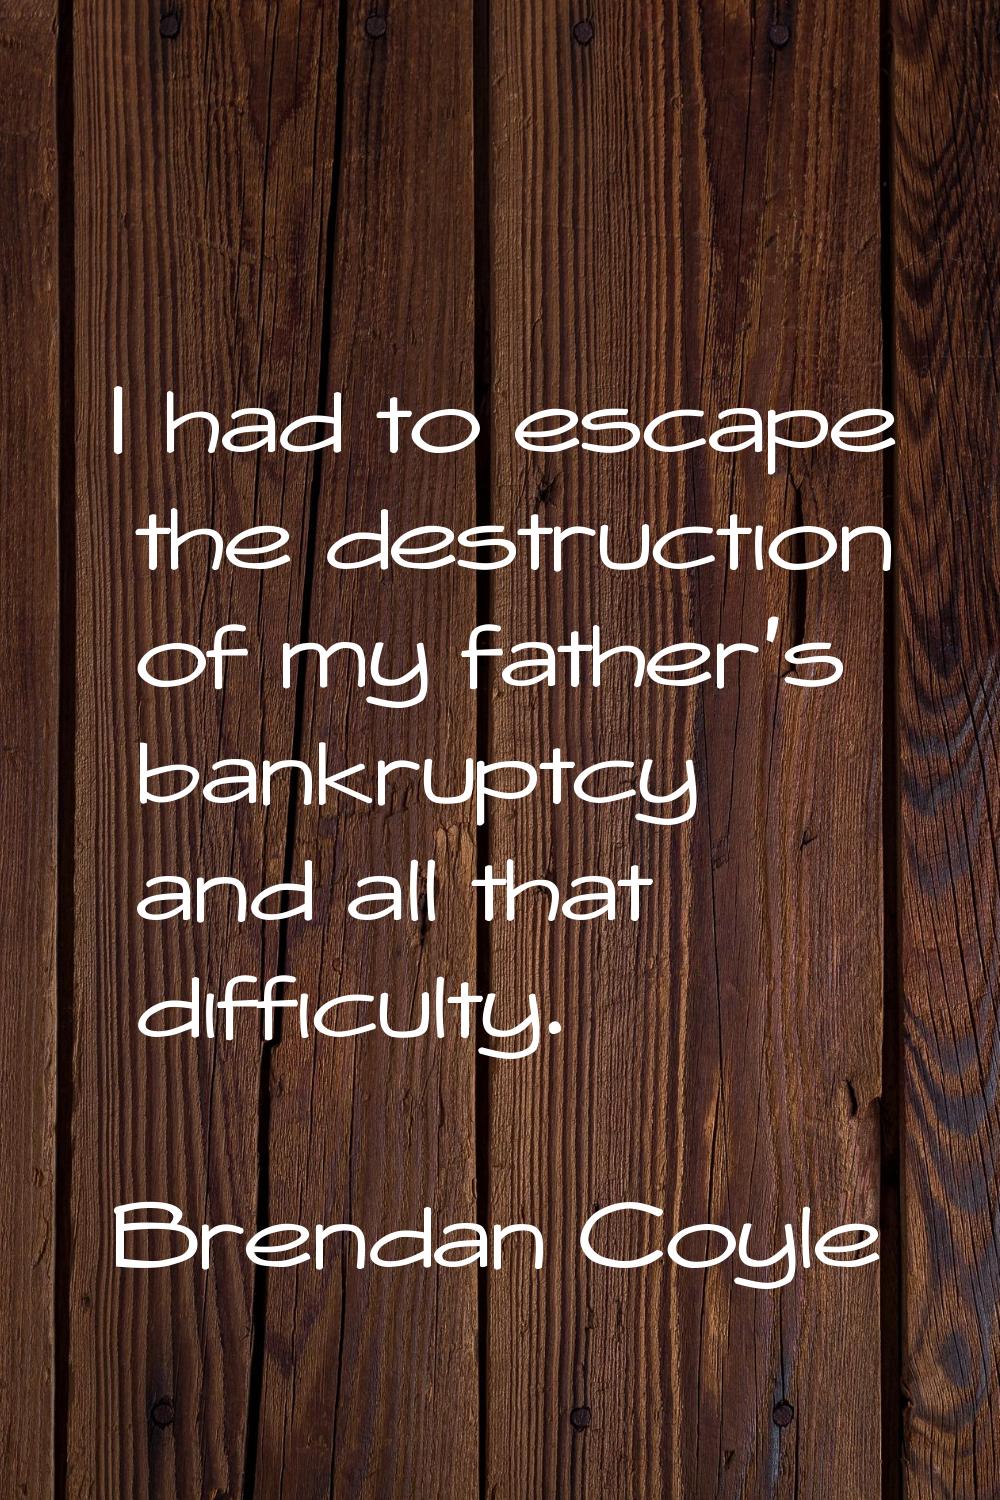 I had to escape the destruction of my father's bankruptcy and all that difficulty.